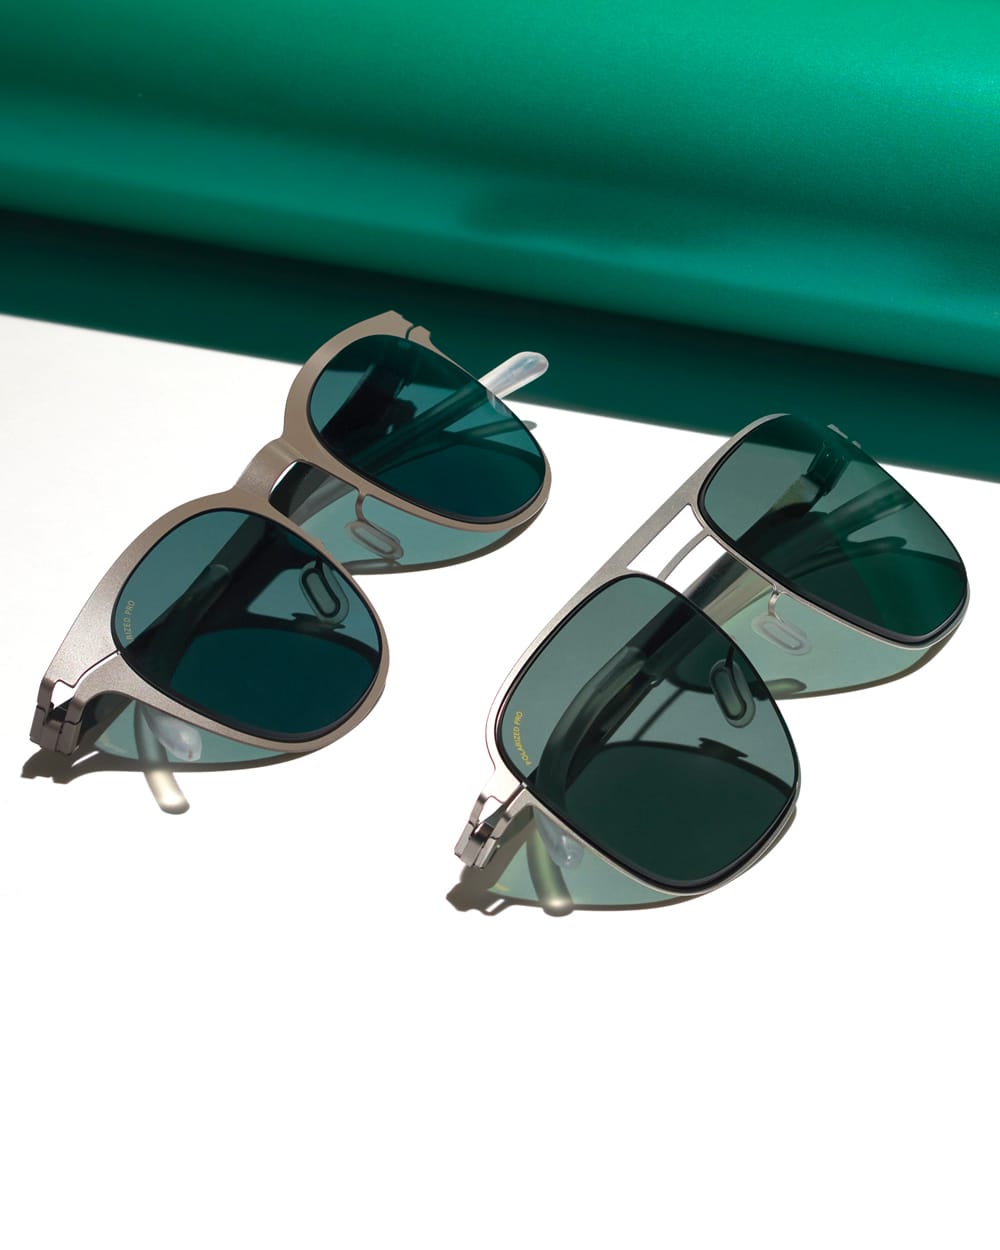 Two pairs of metal frame MYKITA sunglasses with green tinted lenses